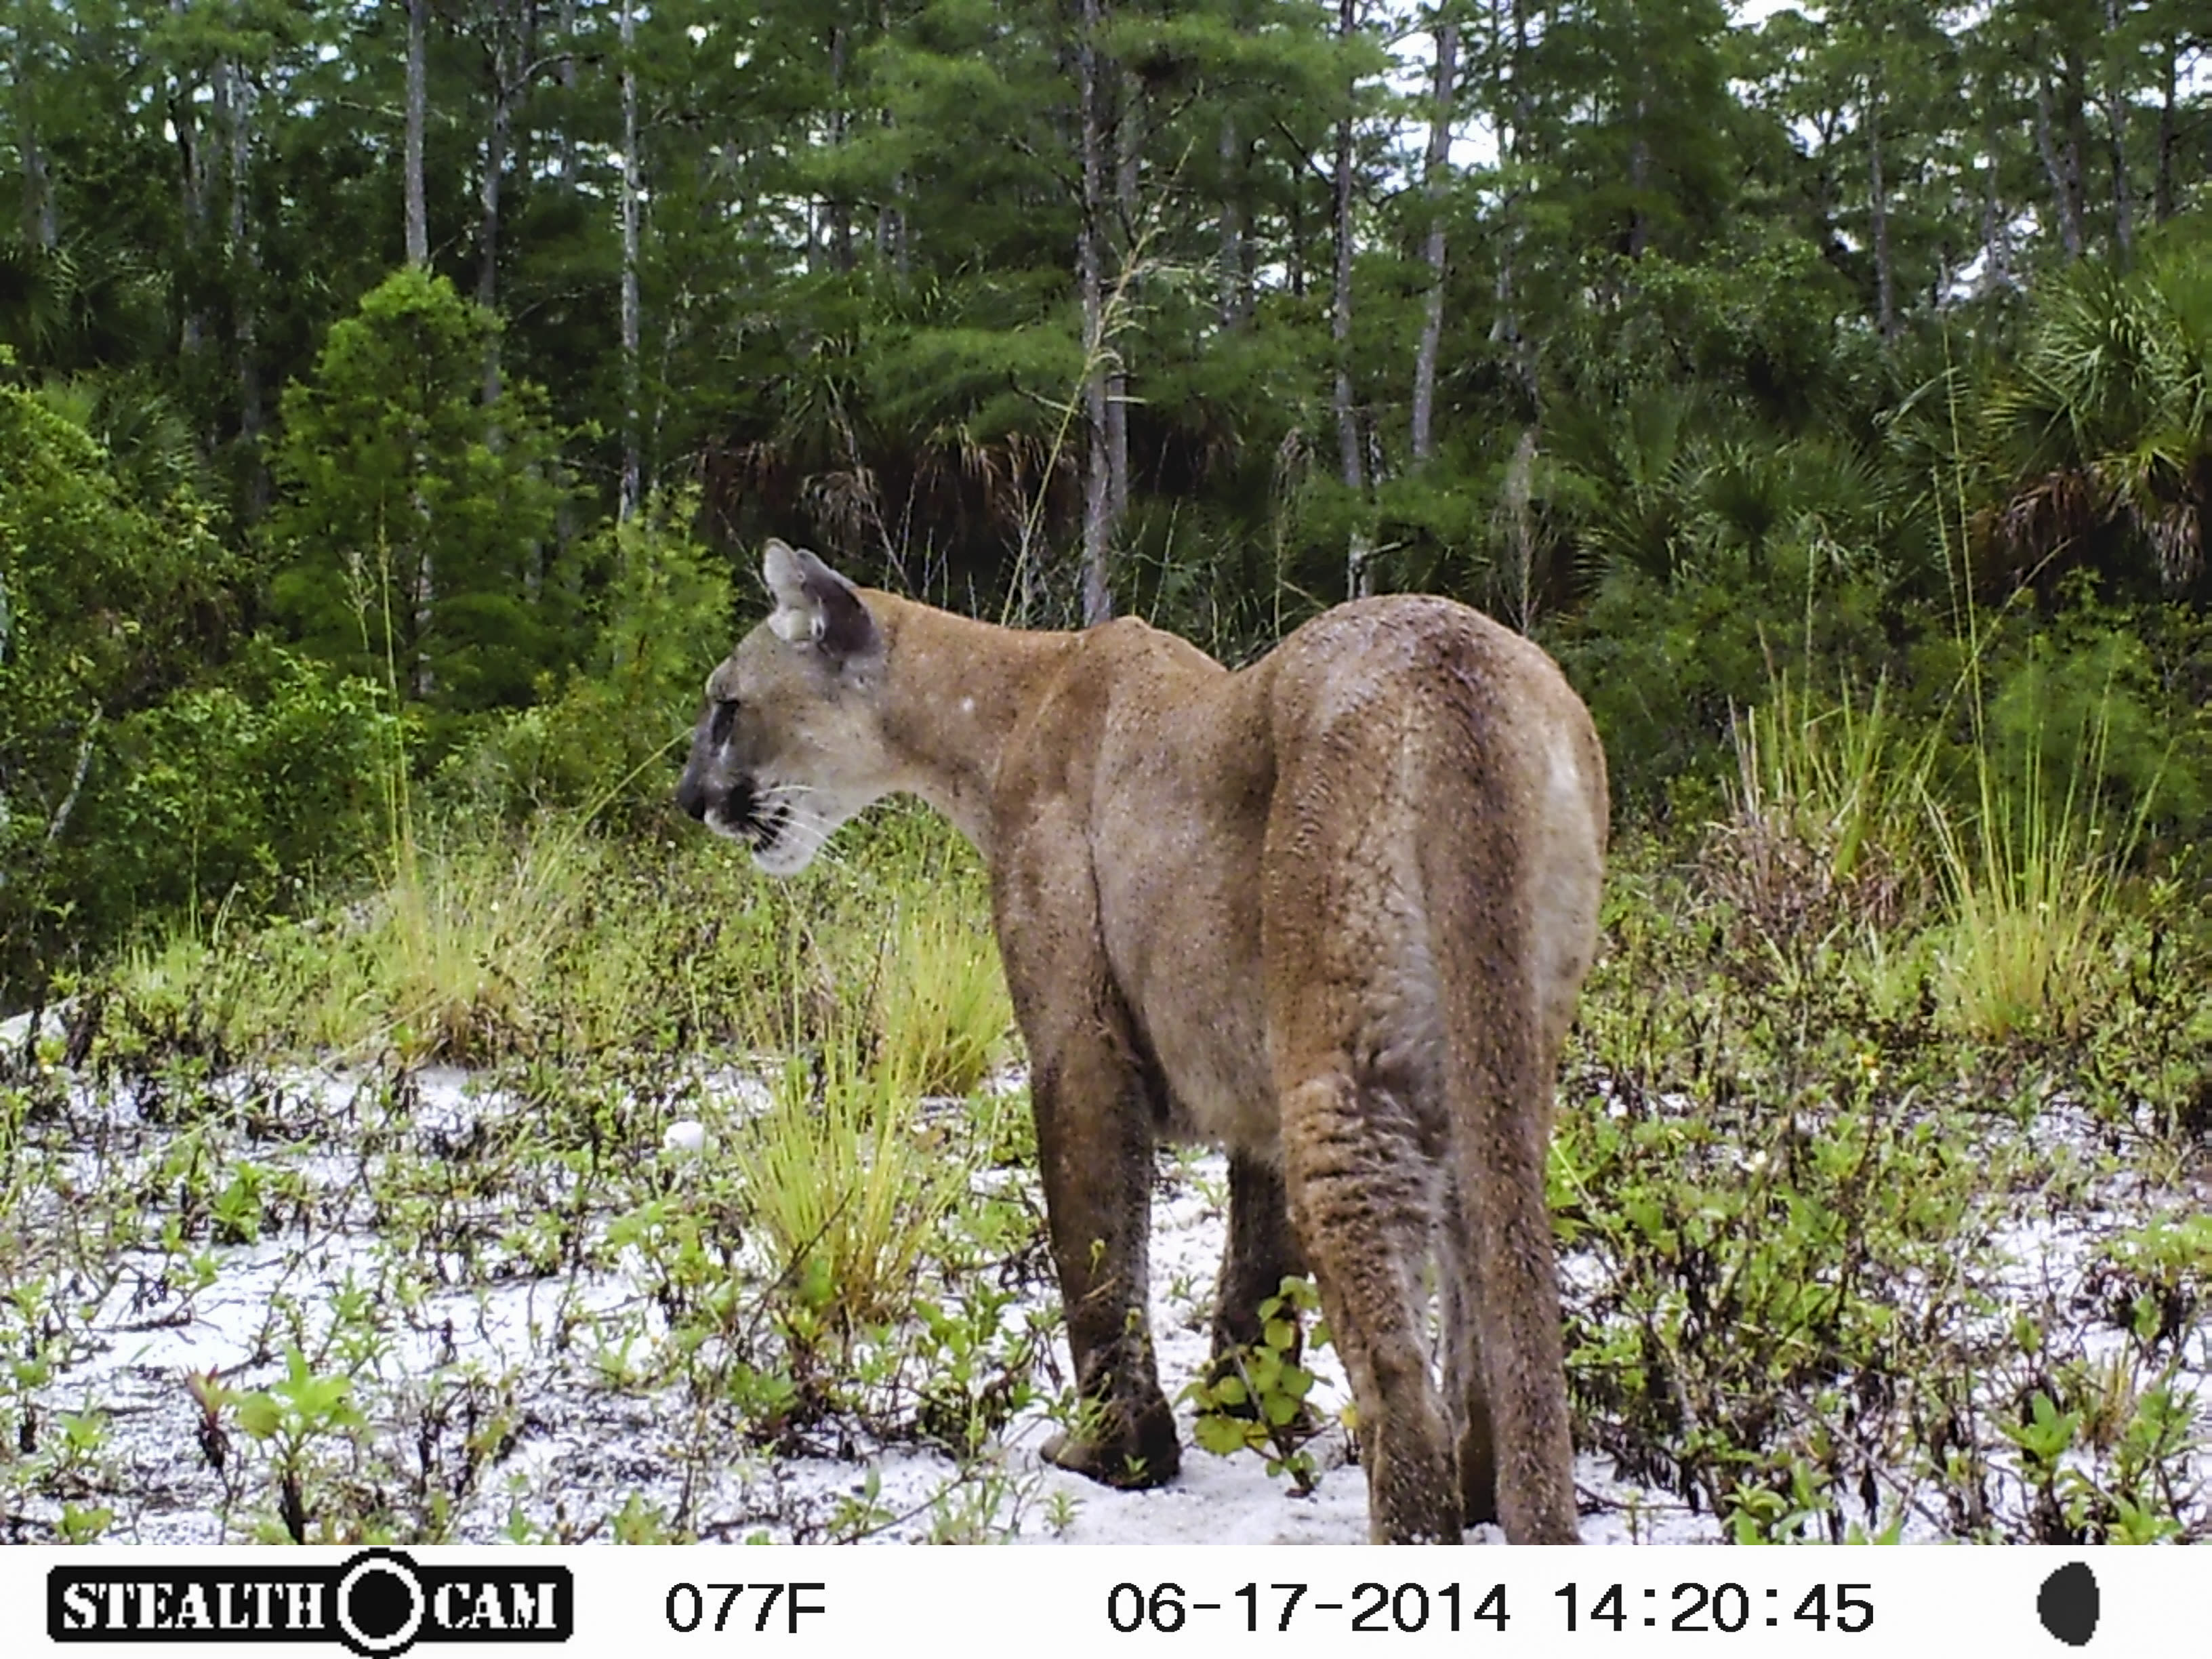 Extinction of Florida panther a concern if halted subdivisions given green light to continue